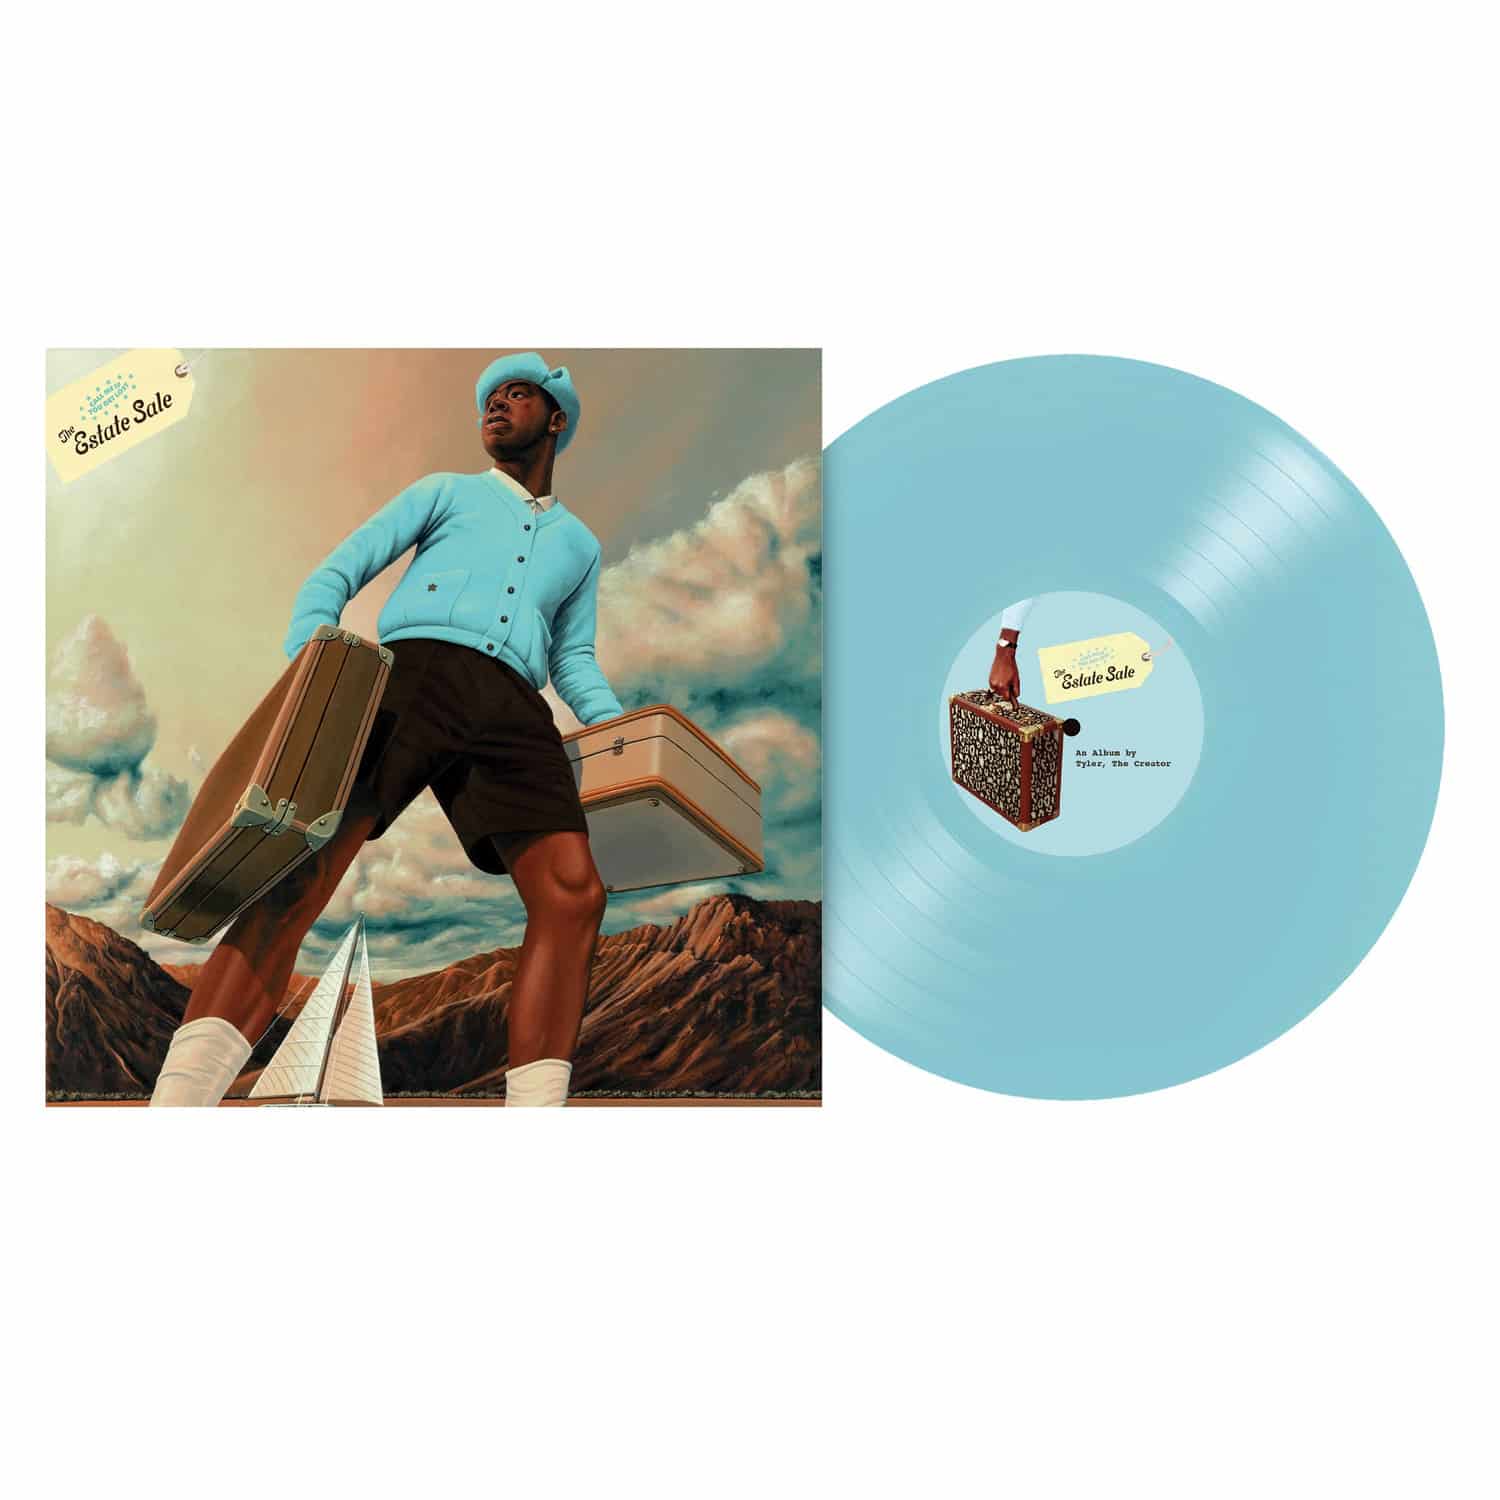 Tyler, The Creator - CALL ME IF YOU GET LOST: THE ESTATE SALE 